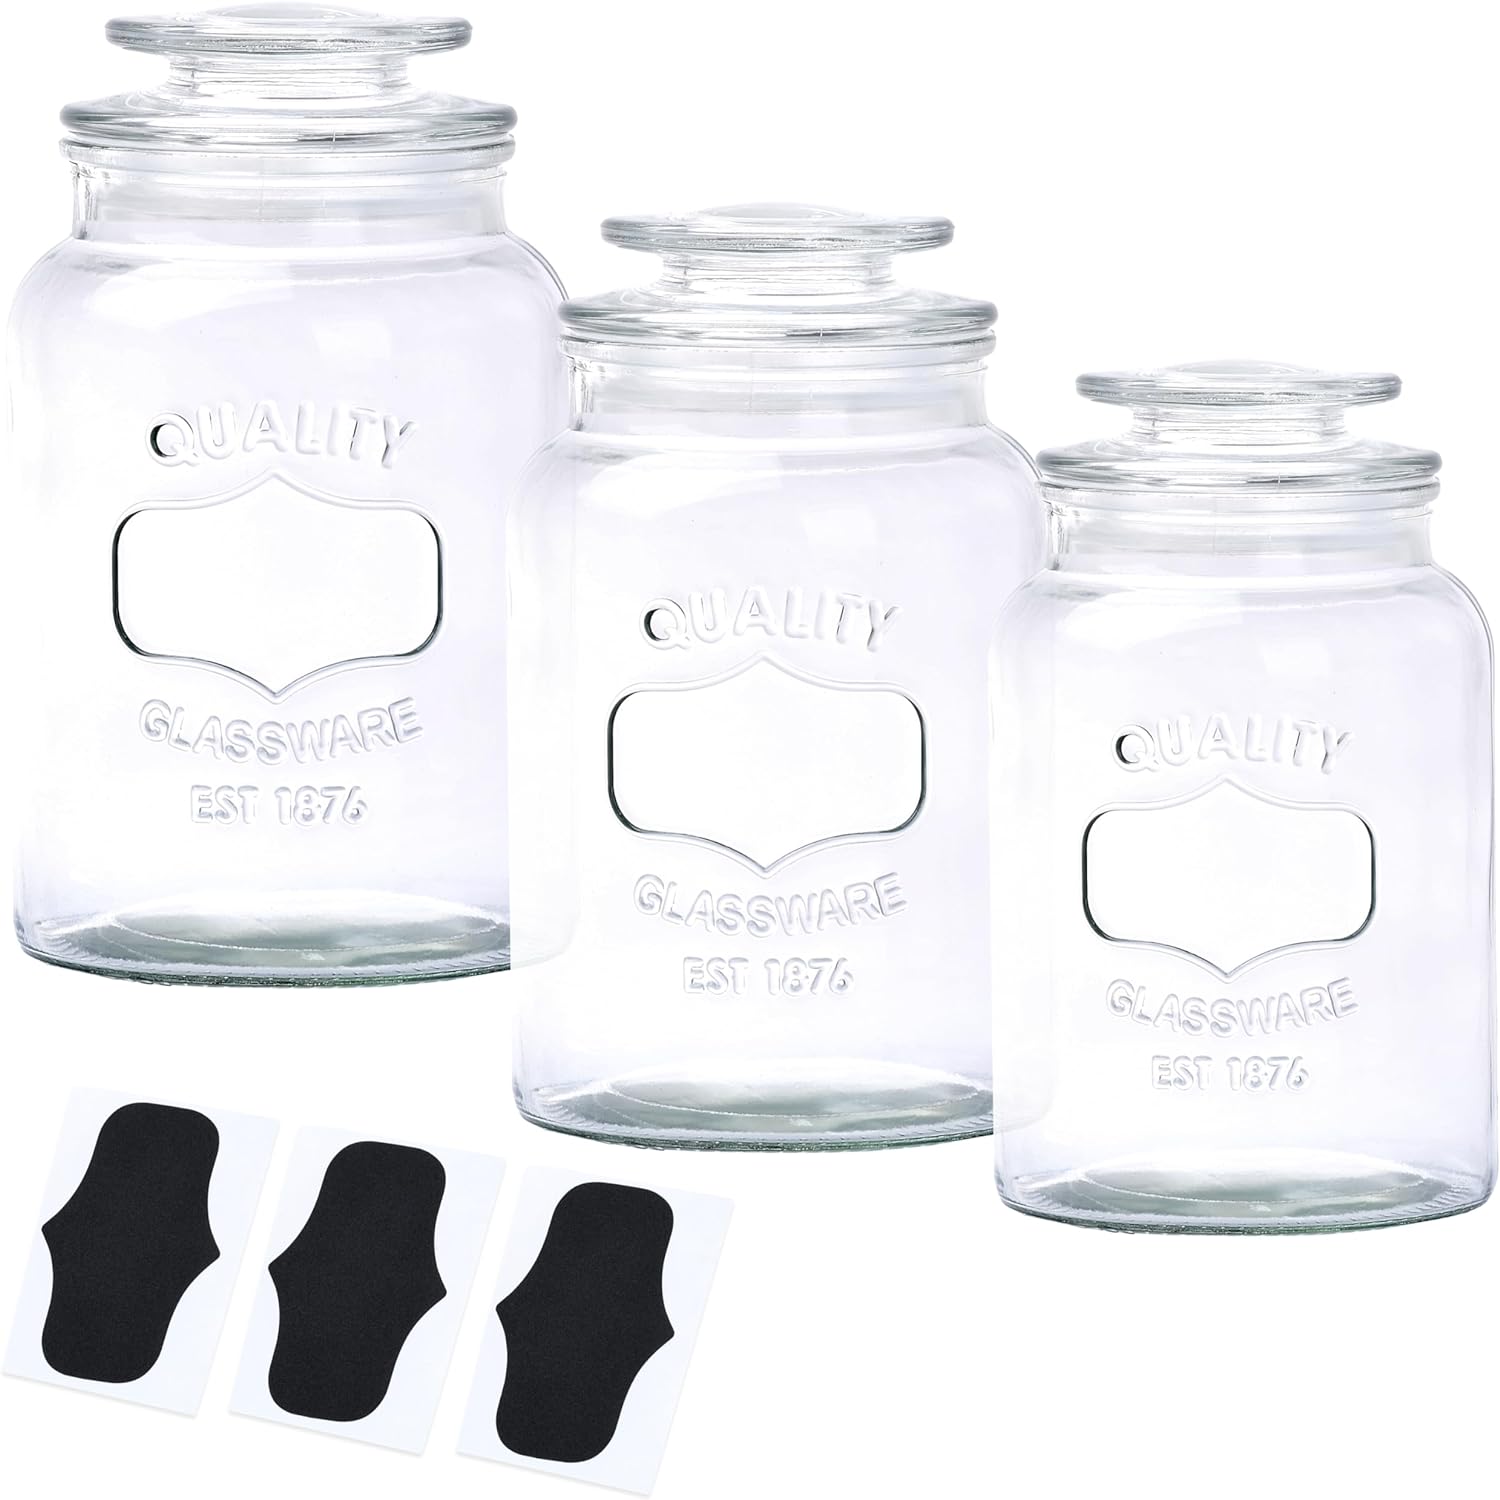 WHOLE HOUSEWARES Glass Jars with Labels, Set of 3 - Canister Sets with Airtight Lids for Candy, Cookie, Flour, Sugar, Coffee - Sealed Food Storage for Pantry - Clear Containers for Kitchen Counter